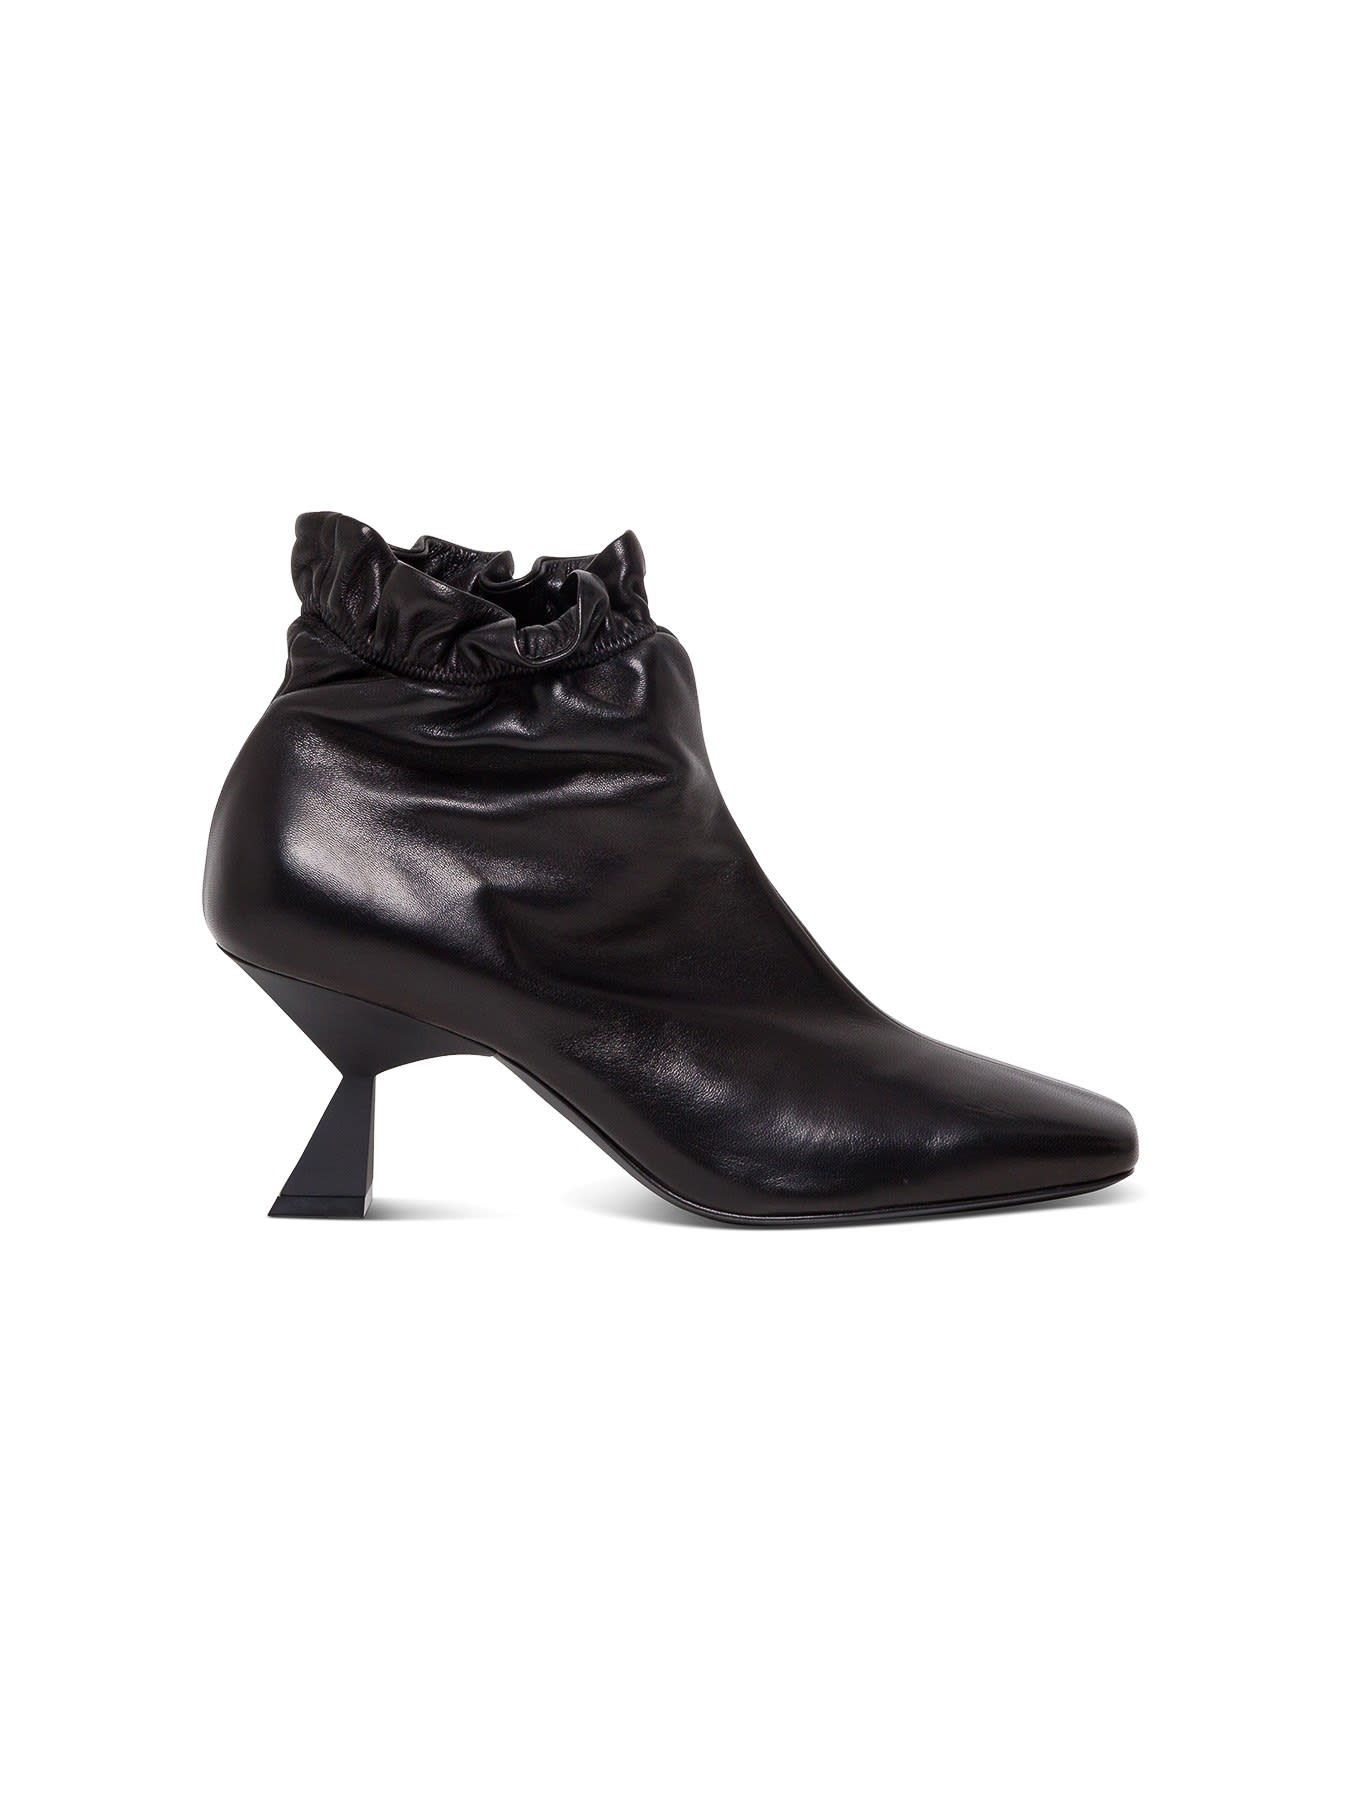 Buy Givenchy Square-toe 75mm Ankle Boots online, shop Givenchy shoes with free shipping